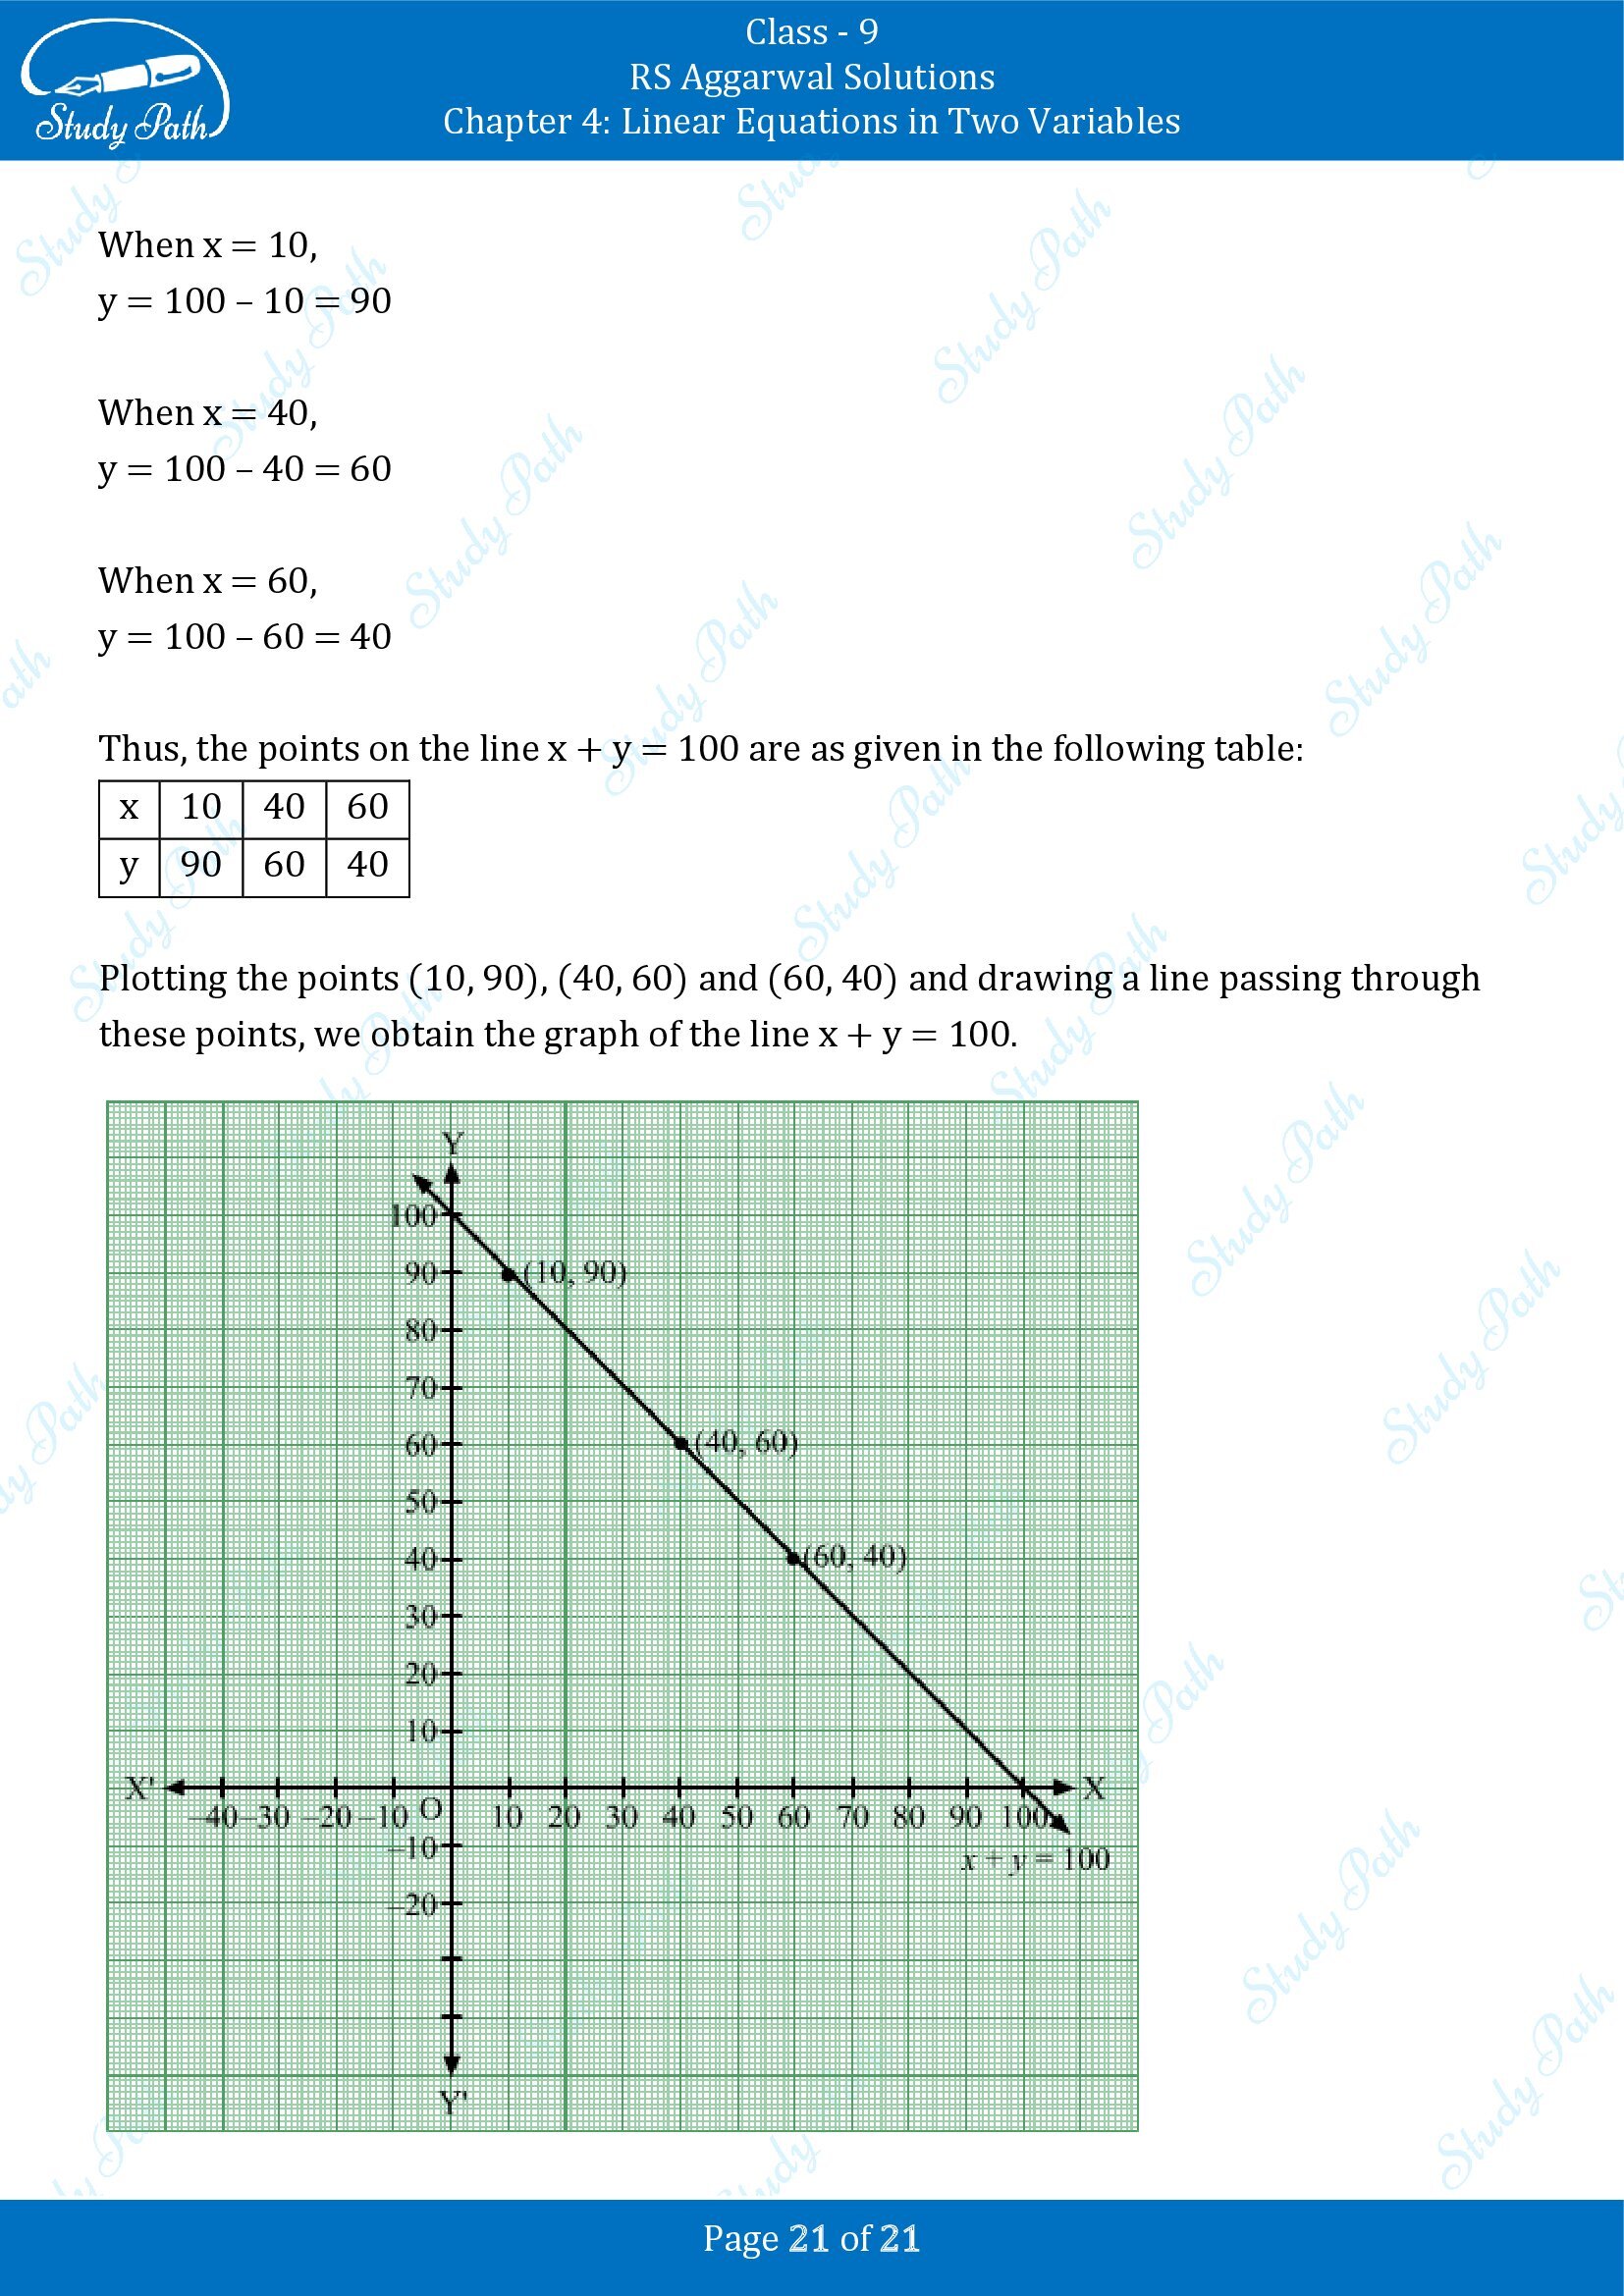 RS Aggarwal Solutions Class 9 Chapter 4 Linear Equations in Two Variables Exercise 4B 00021